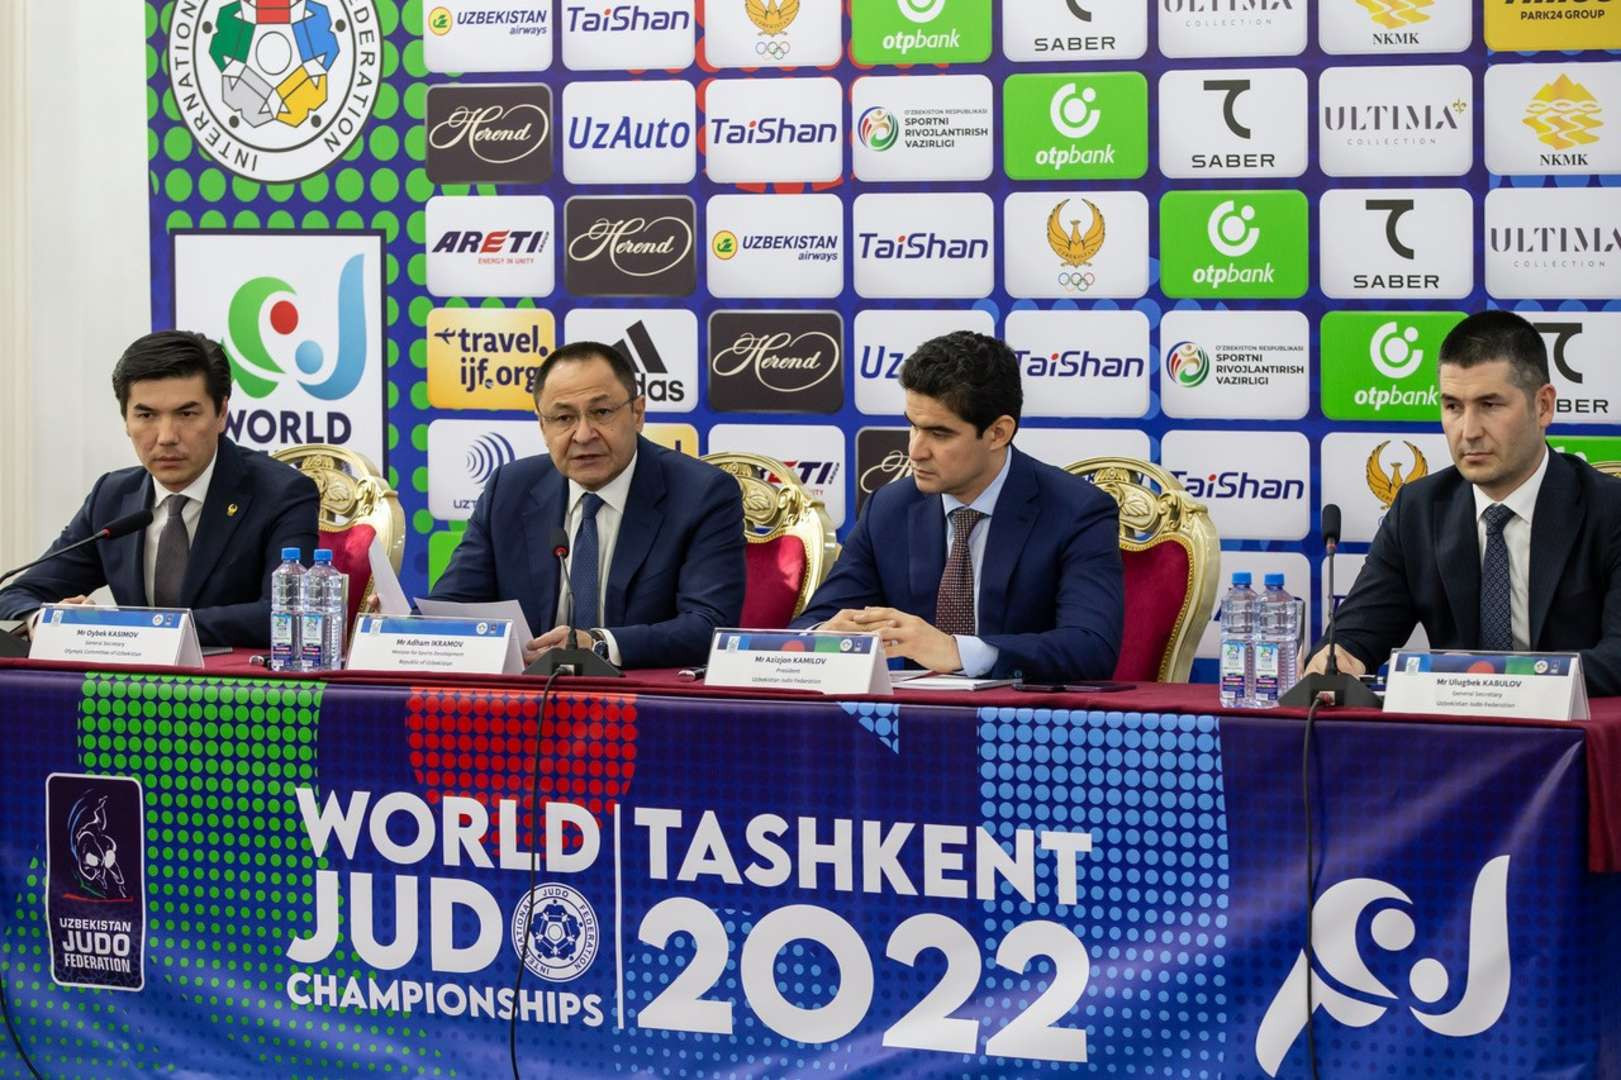 Tashkent is set to host the Judo World Championships for the first time, with competition scheduled from tomorrow until October 13 ©IJF